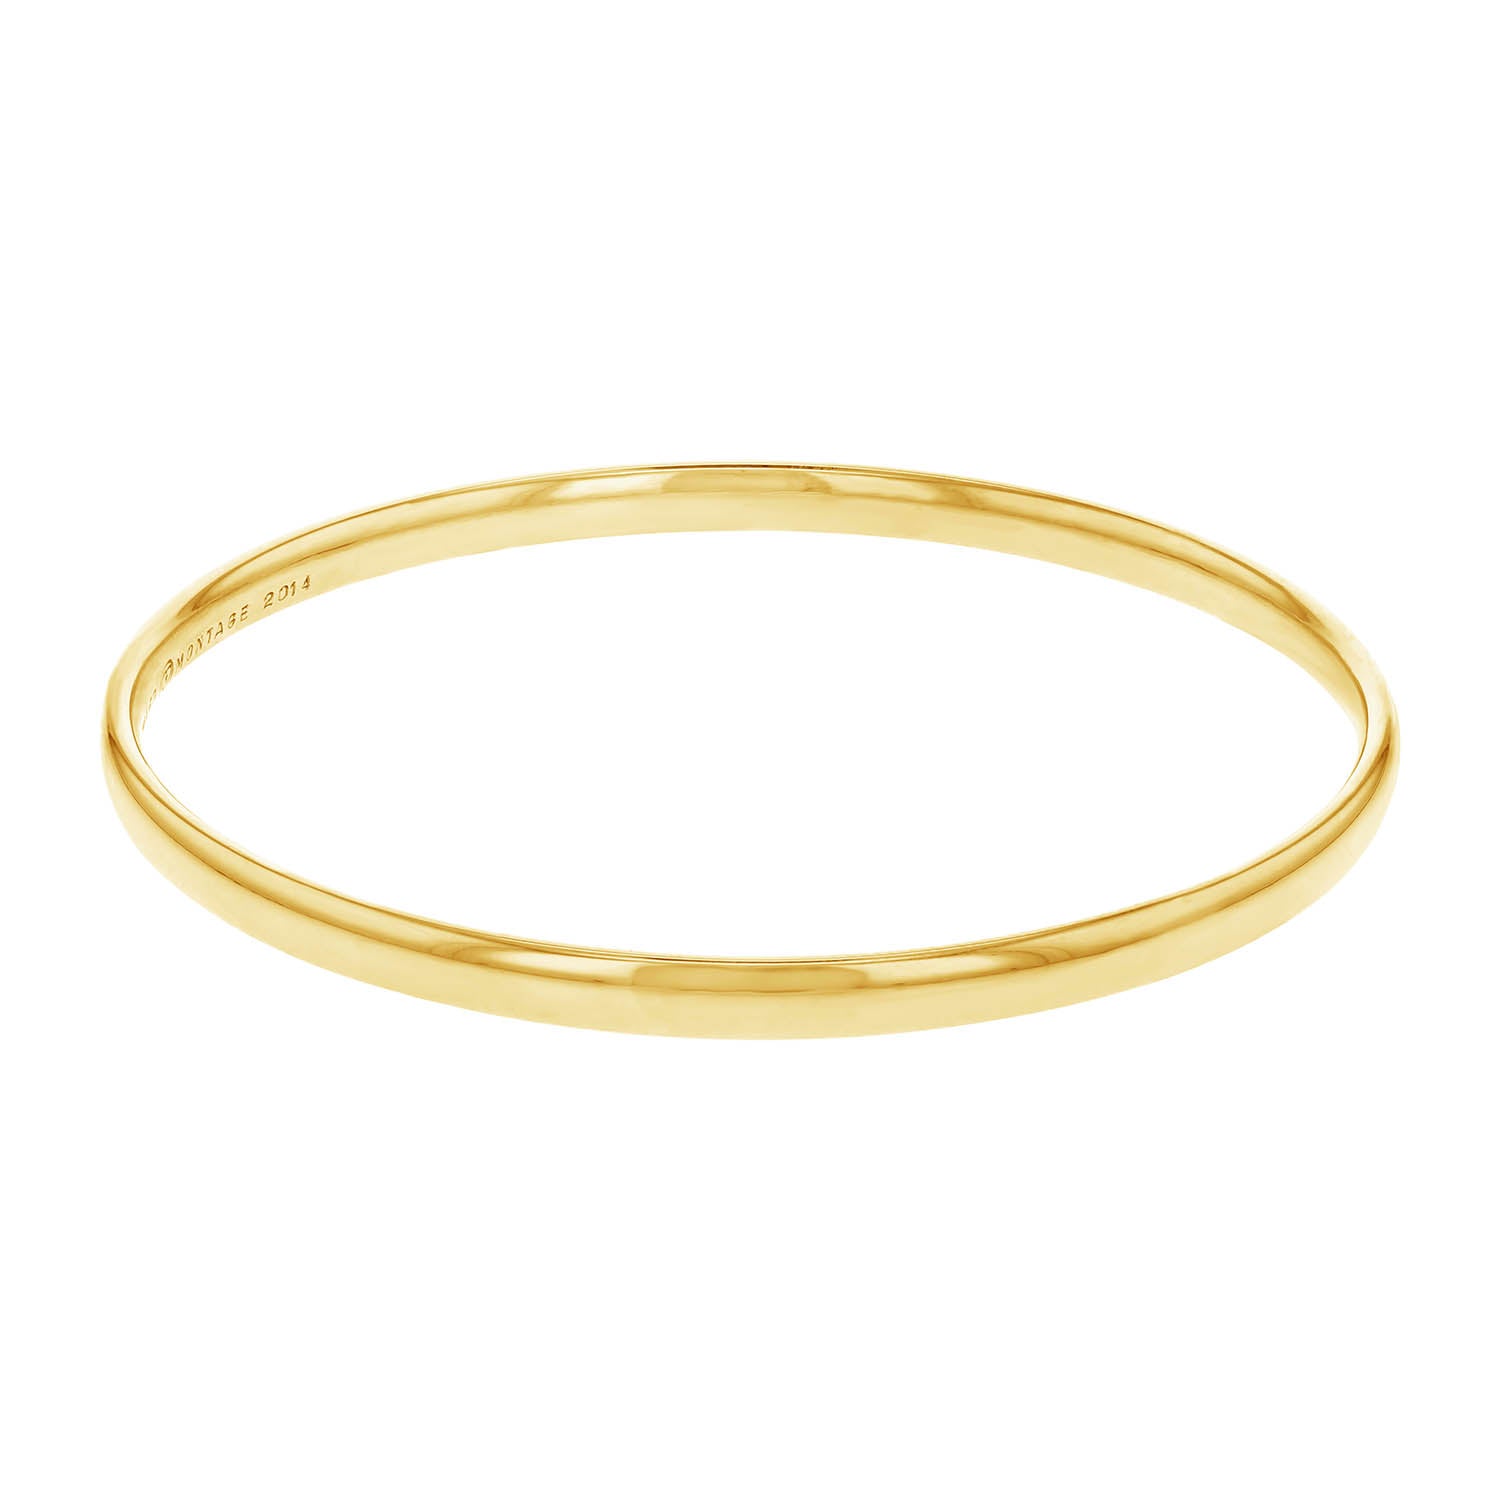 9ct Yellow Gold Sliver filled bangle, 63mm